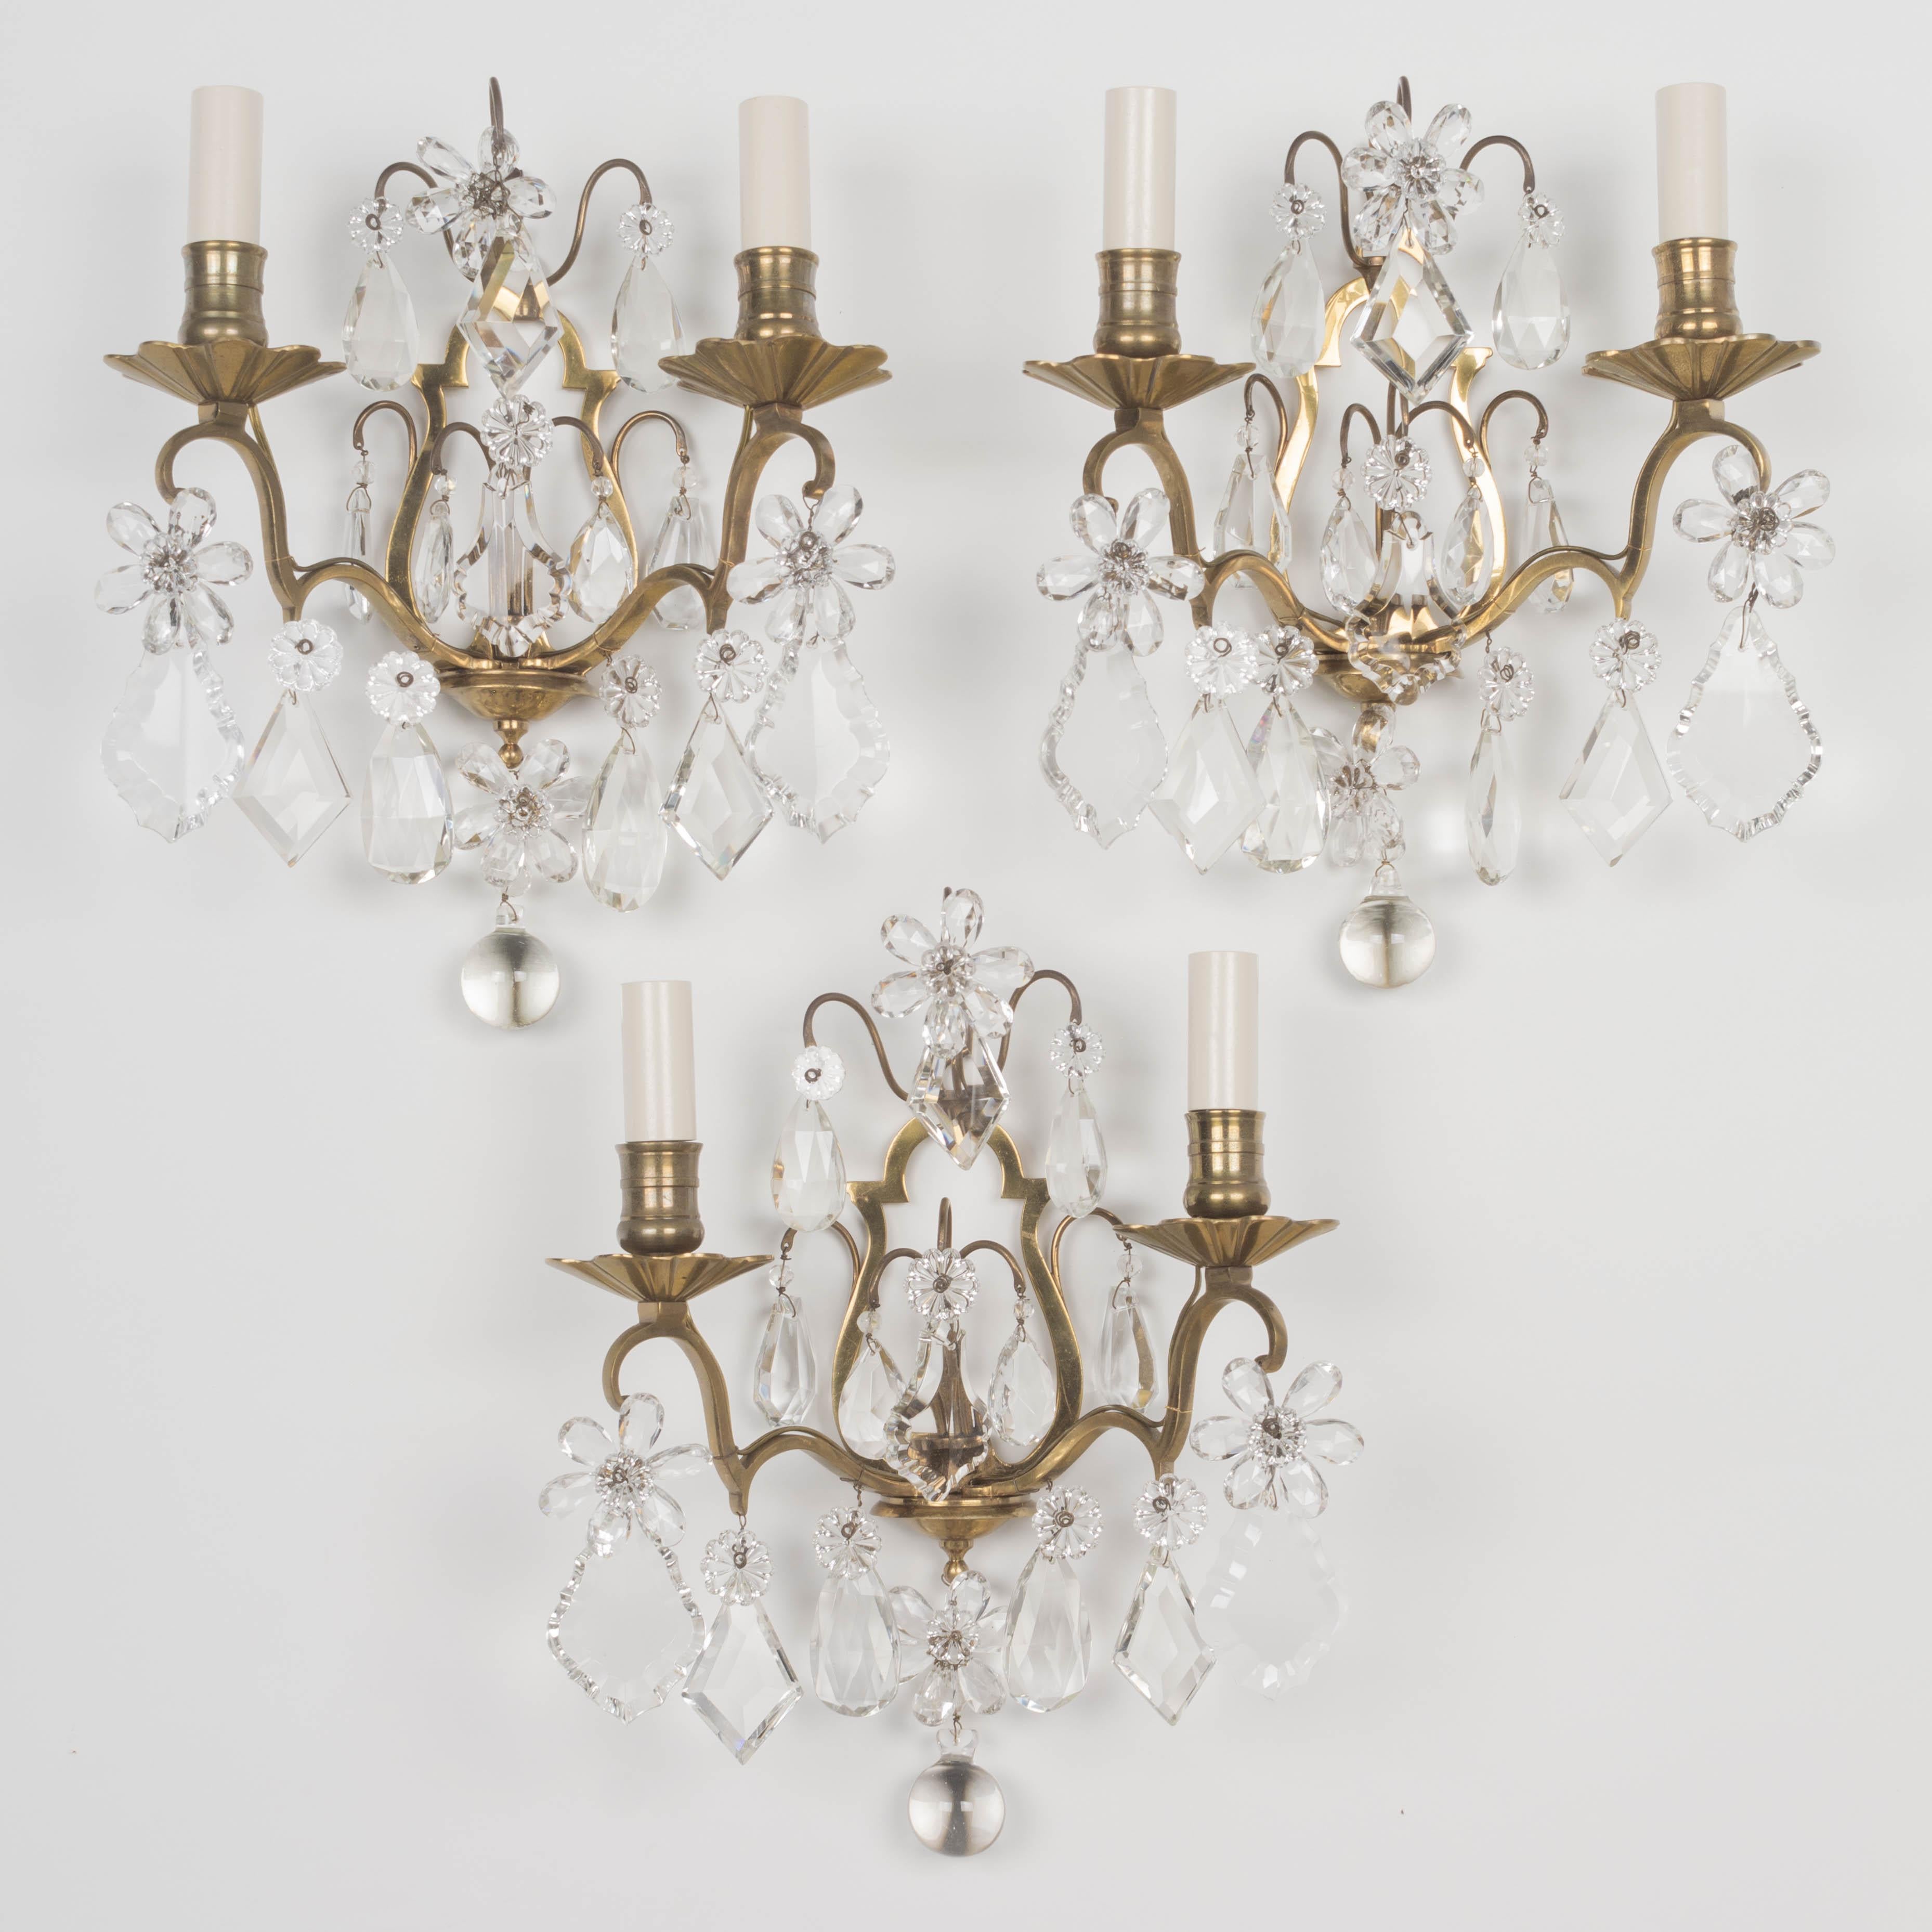 A set of three French Maison Bagues cast brass and crystal sconces. Good quality heavy casting with two scrolled candle arms and a variety of cut crystal teardrop pendalogues and faceted crystal flowers with rosettes. All original prisms. Rewired